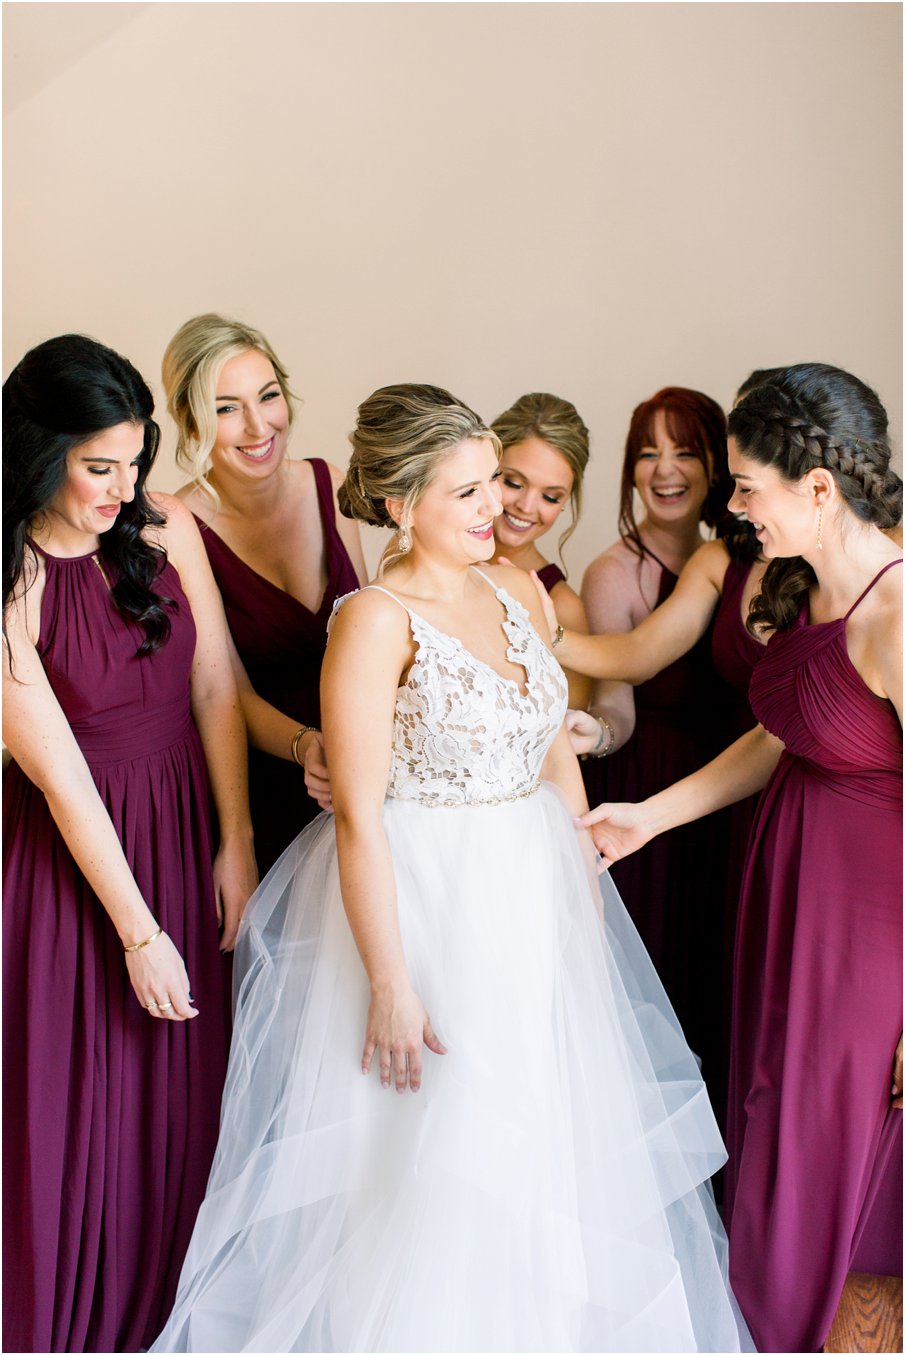 A Hayley Paige bride getting ready with all her bridesmaids at Rust Manor House in Leesburg, Virginia. Bridesmaids wearing burgundy dresses